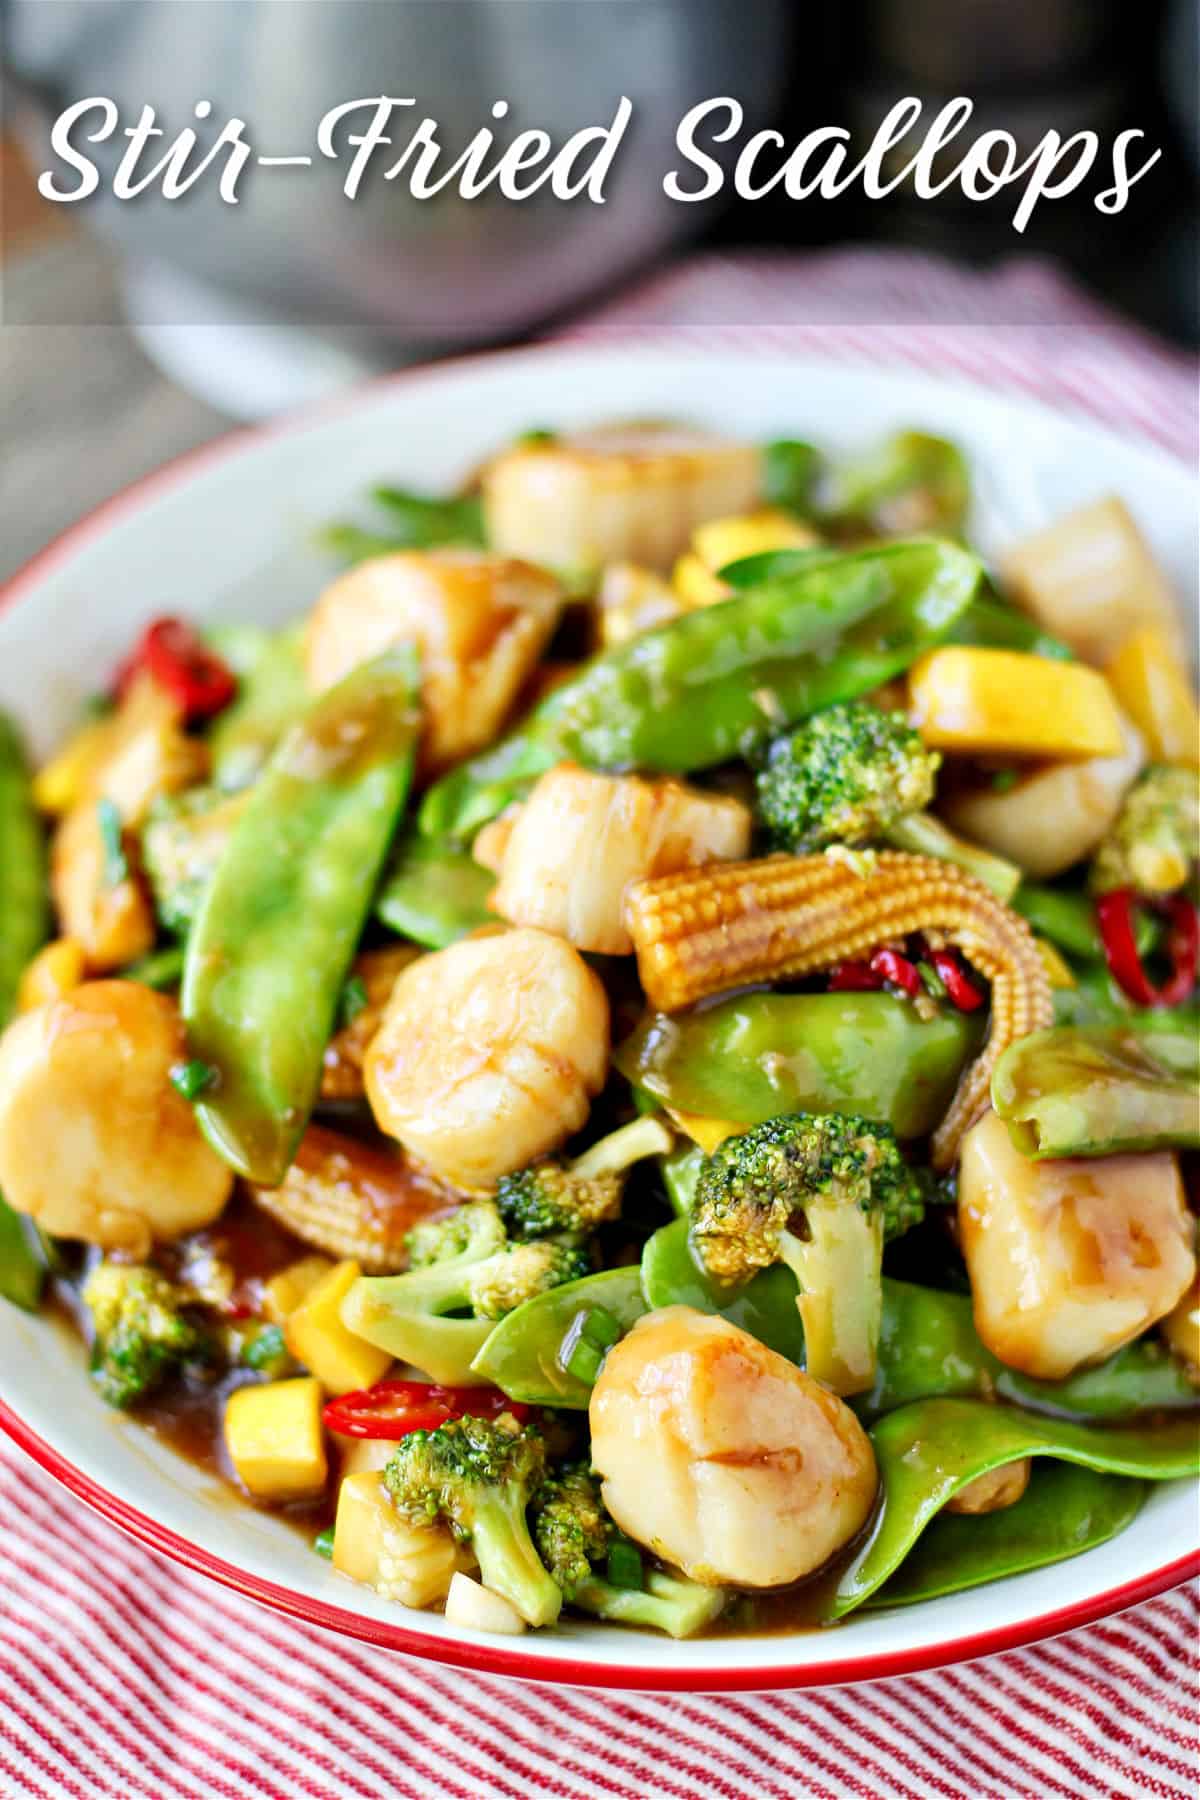 Stir-Fried Scallops and Broccoli in a large bowl.